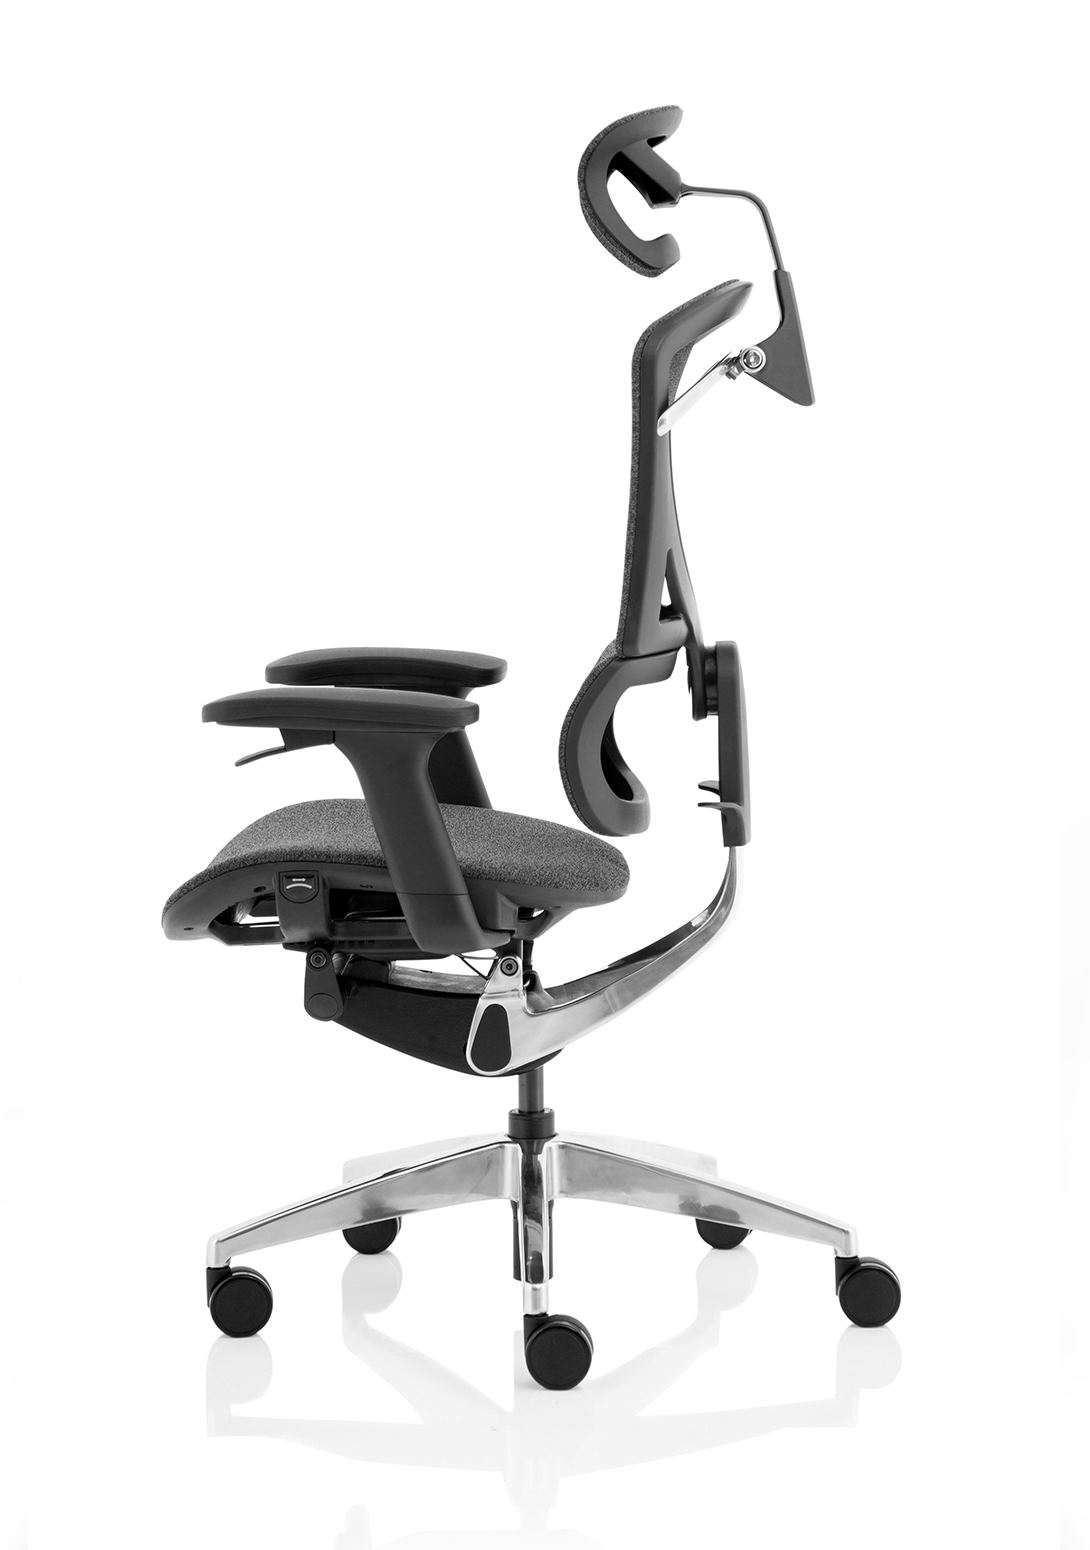 ErgoClick Plus Home Office Chair | Posture Chair | Home Office Furniture | Combat poor posture | Chair that helps with posture | Ergonomic Office Furniture